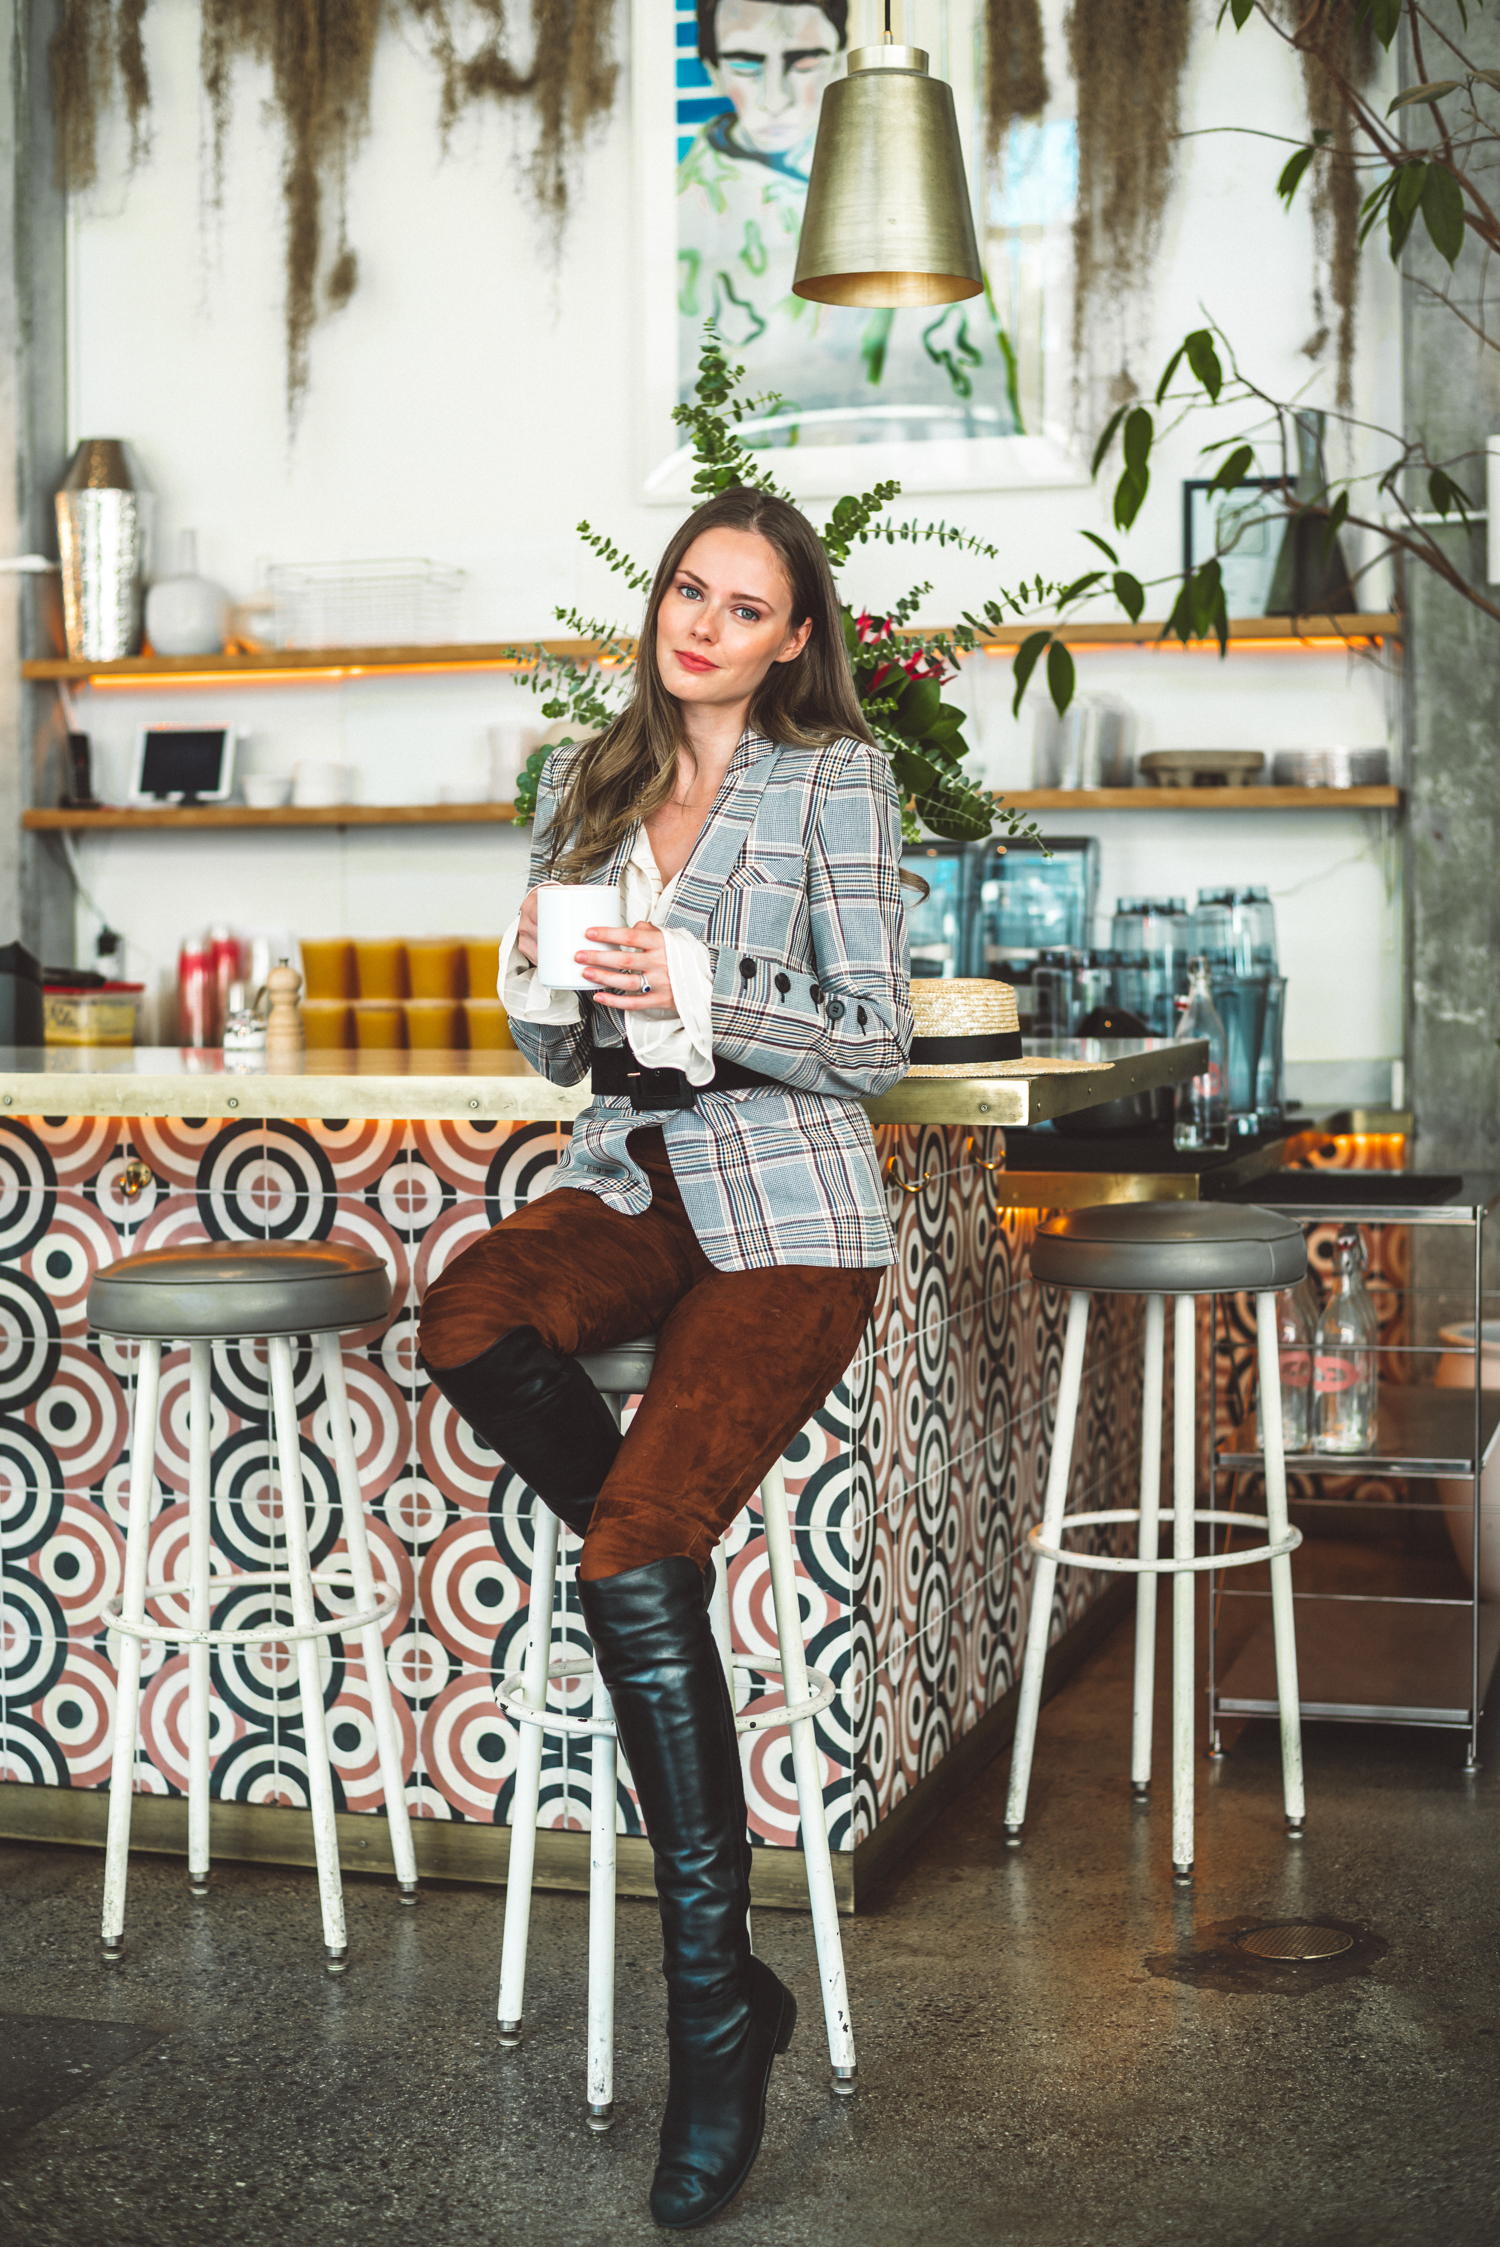 Alyssa Campanella of The A List blog travels to San Francisco with Alaska Airlines and Shopstyle wearing Veronica Beard plaid dickey jacket and Joseph suede pants.